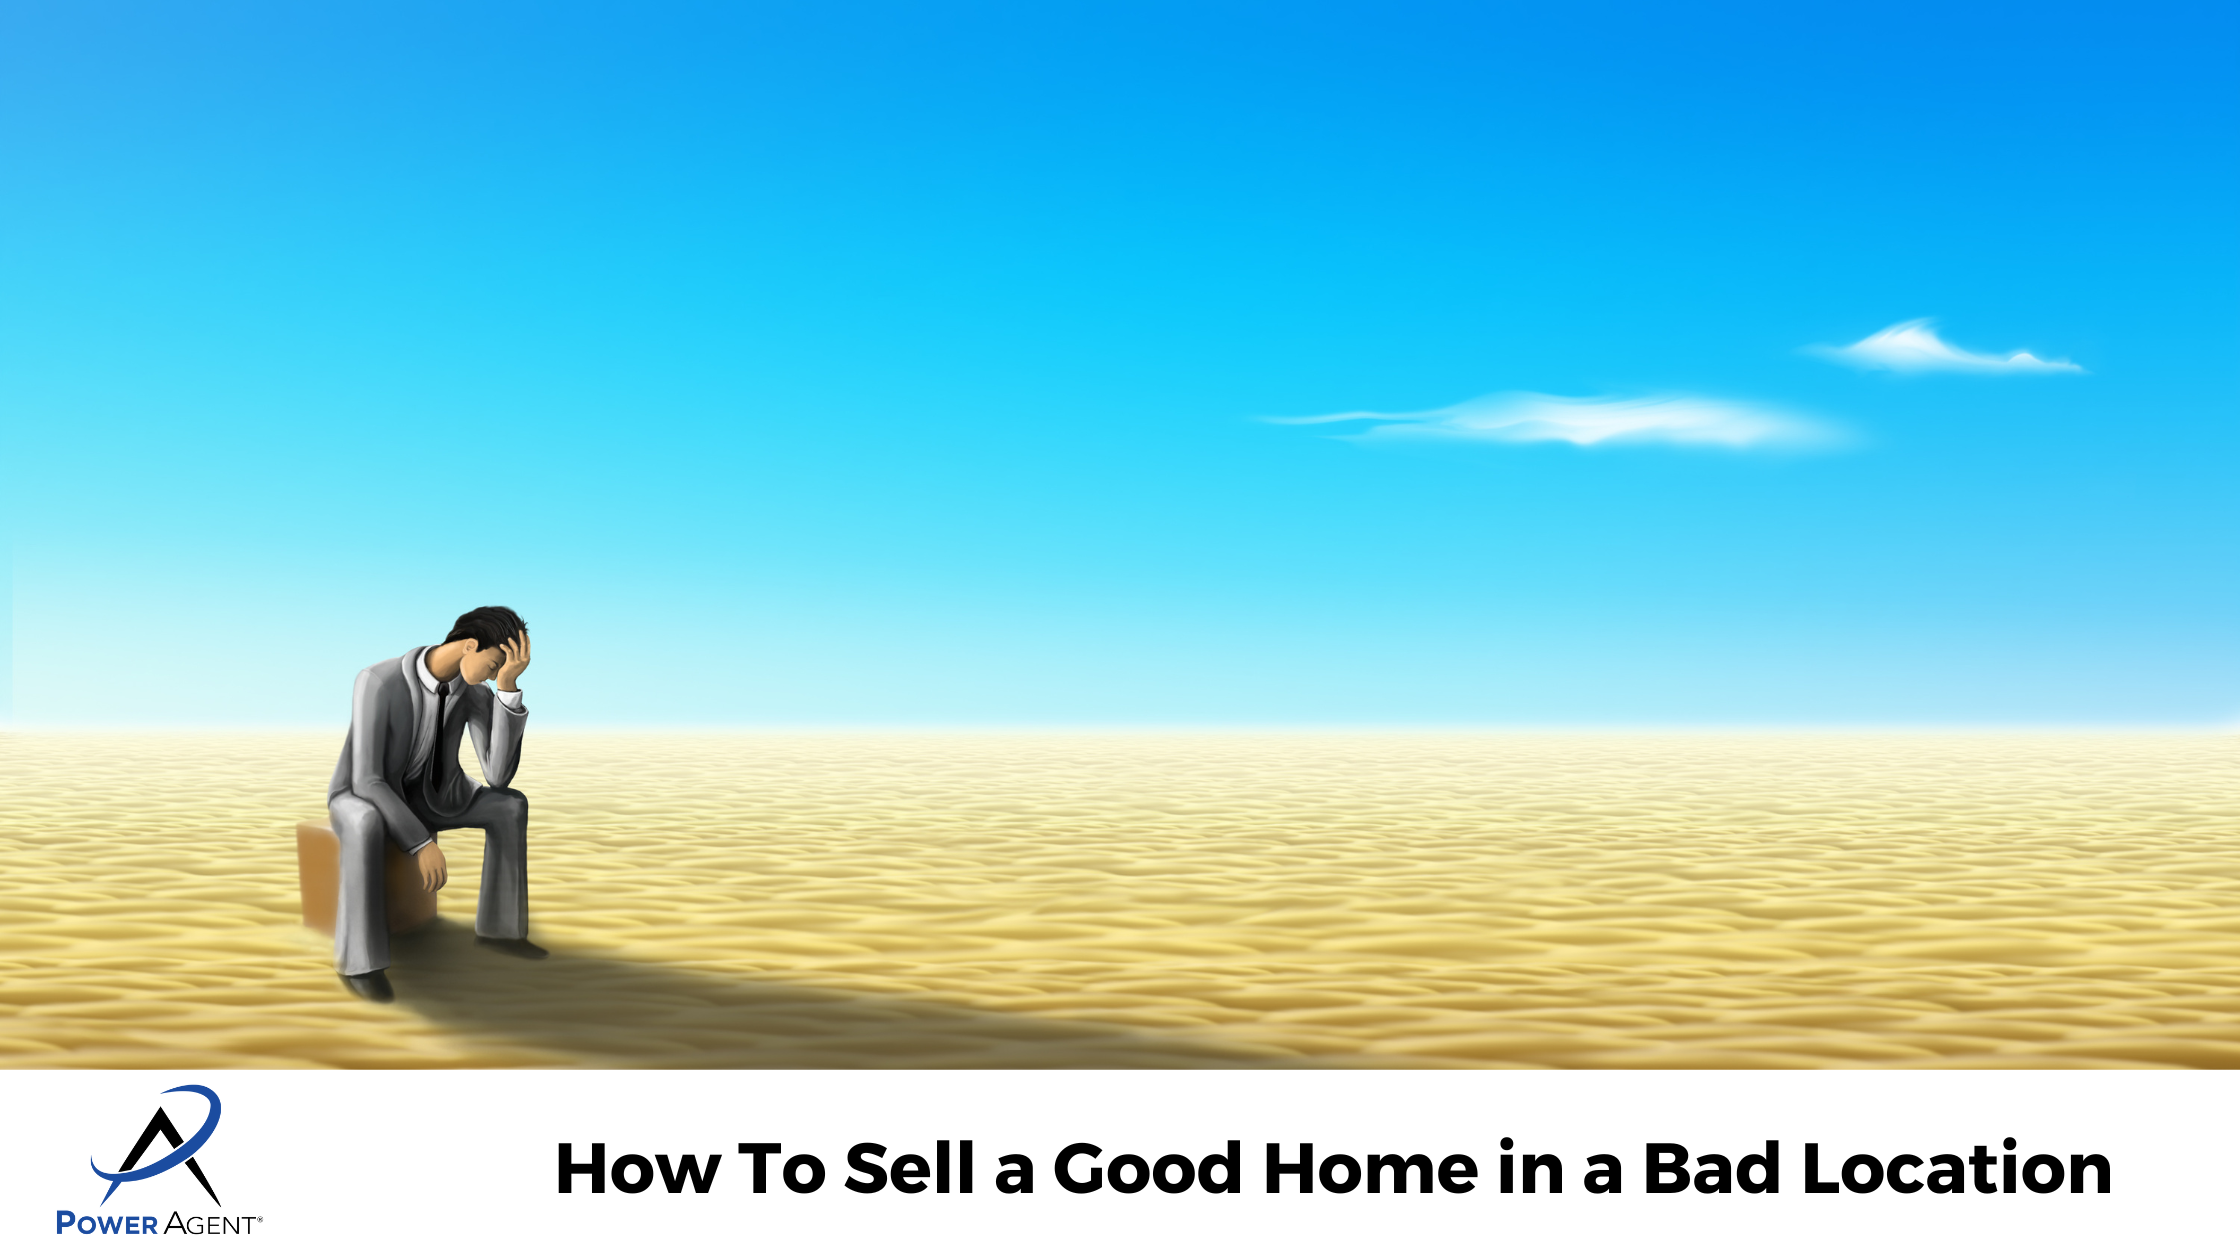 How To Sell a Good Home in a Bad Location